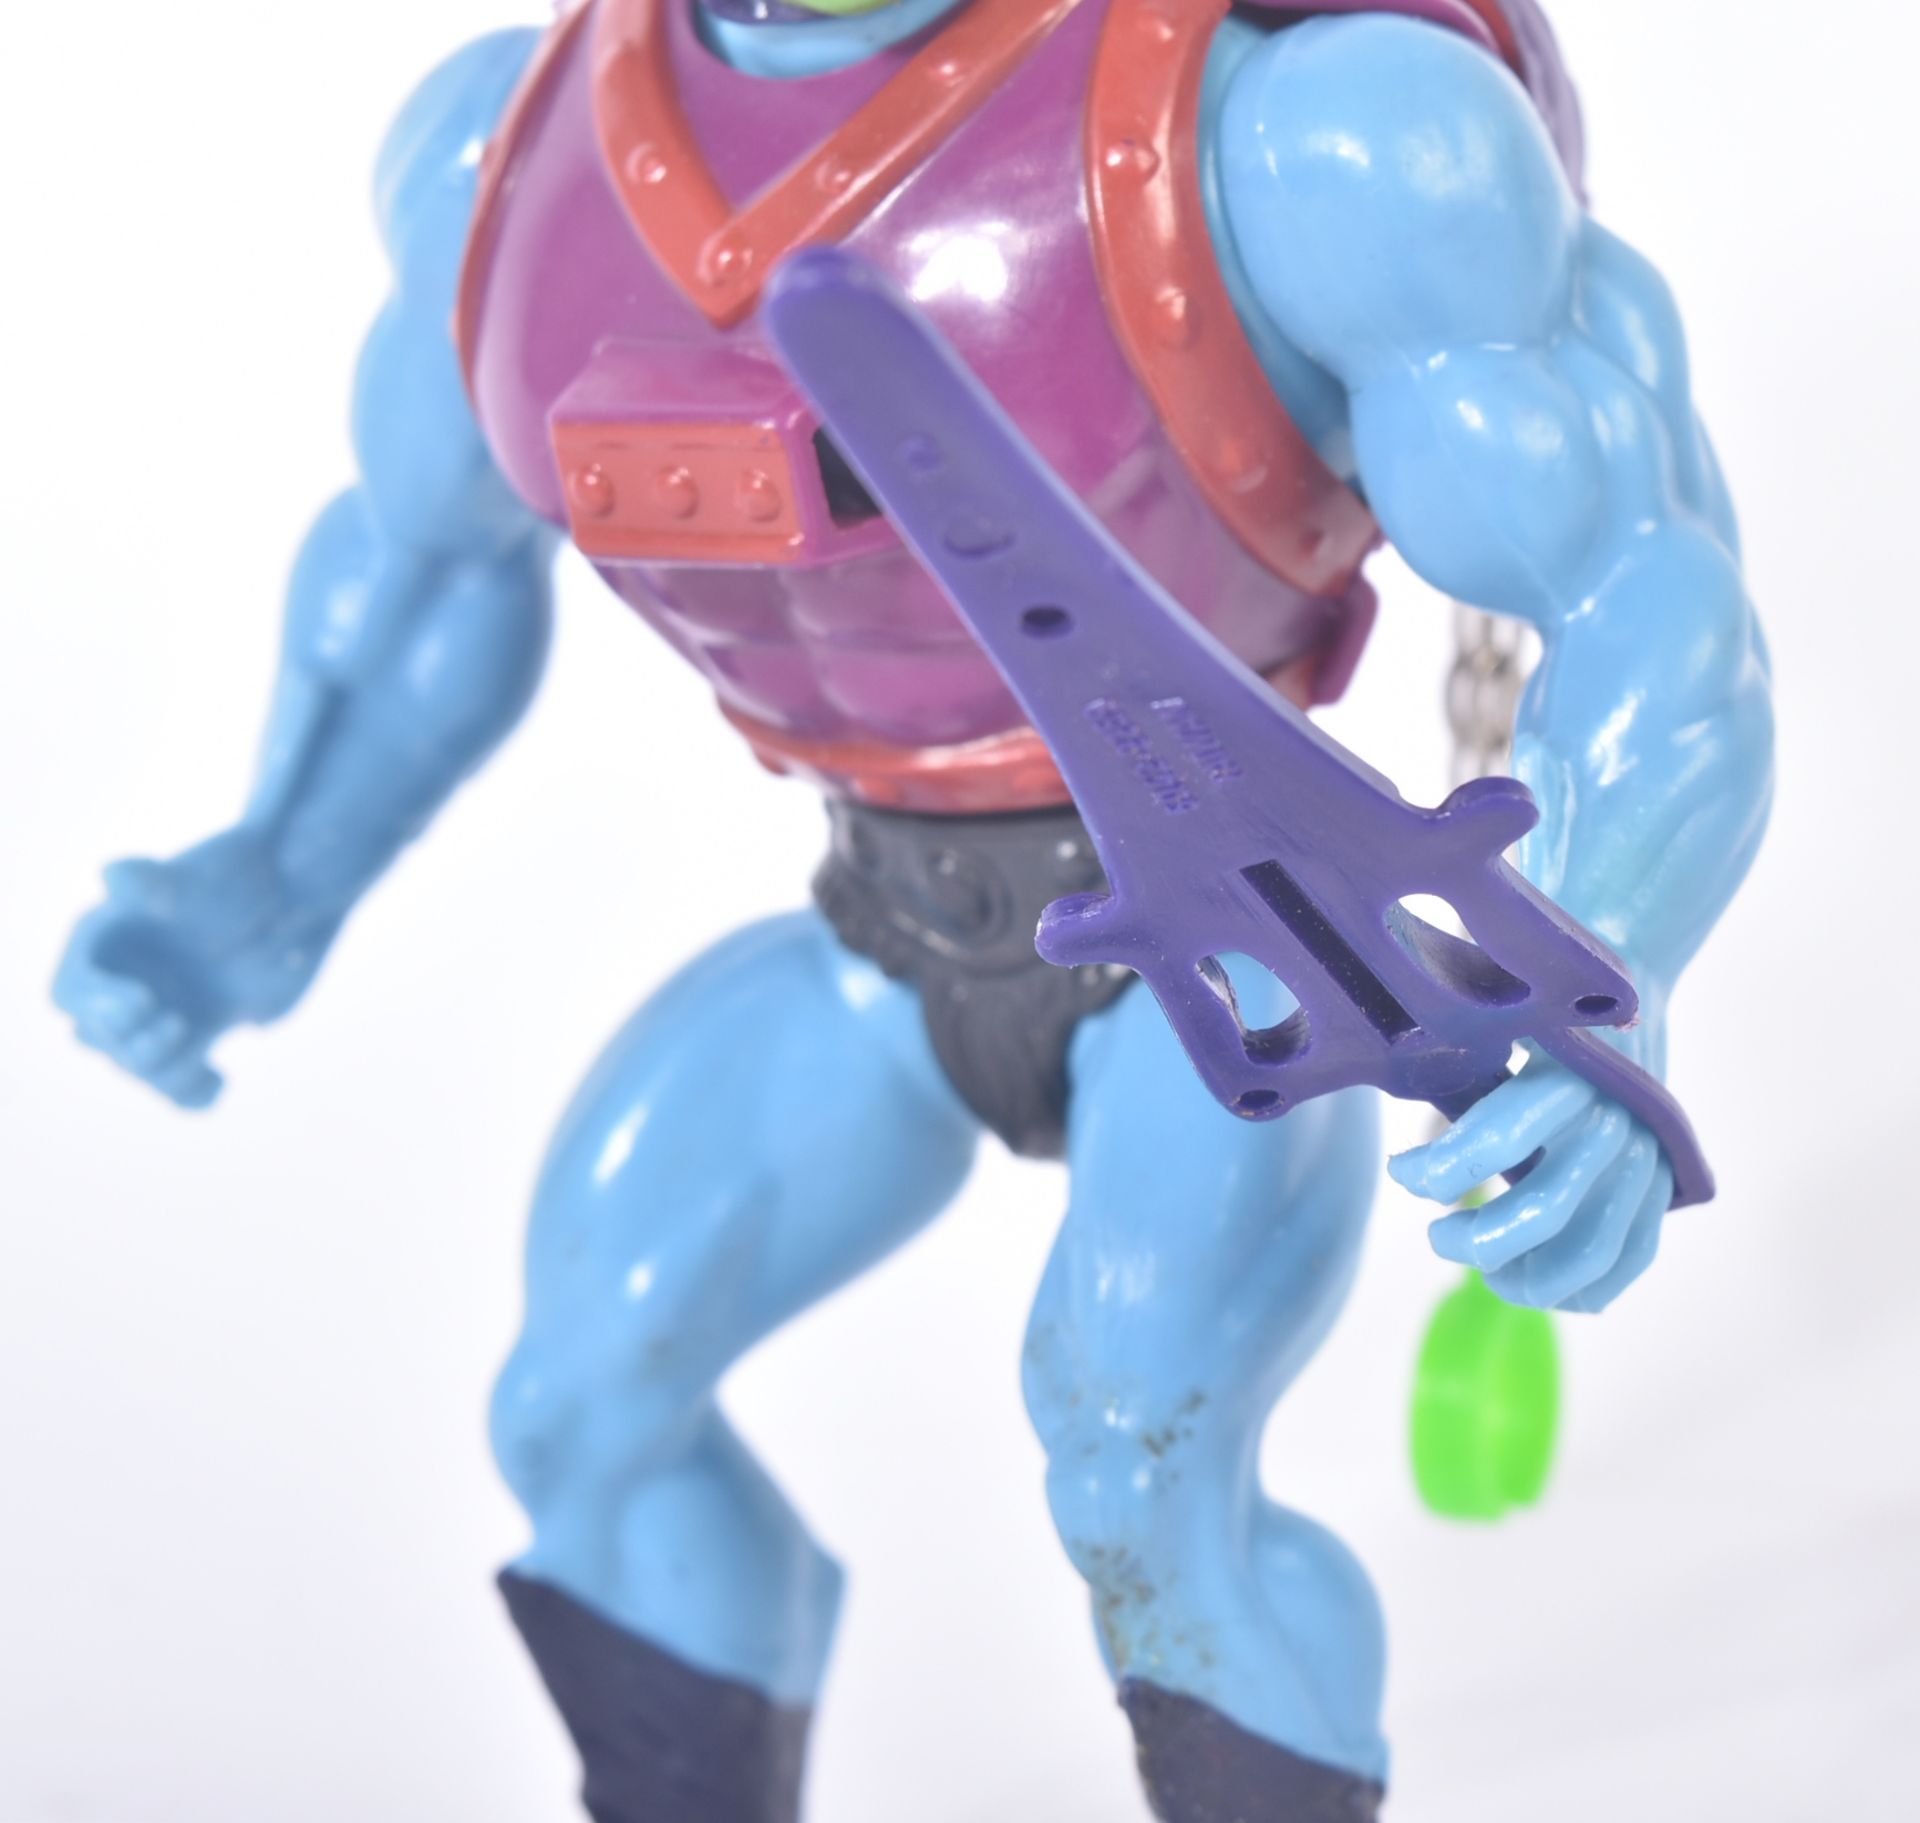 MASTERS OF THE UNIVERSE - VINTAGE MATTEL ACTION FIGURE - Image 2 of 5